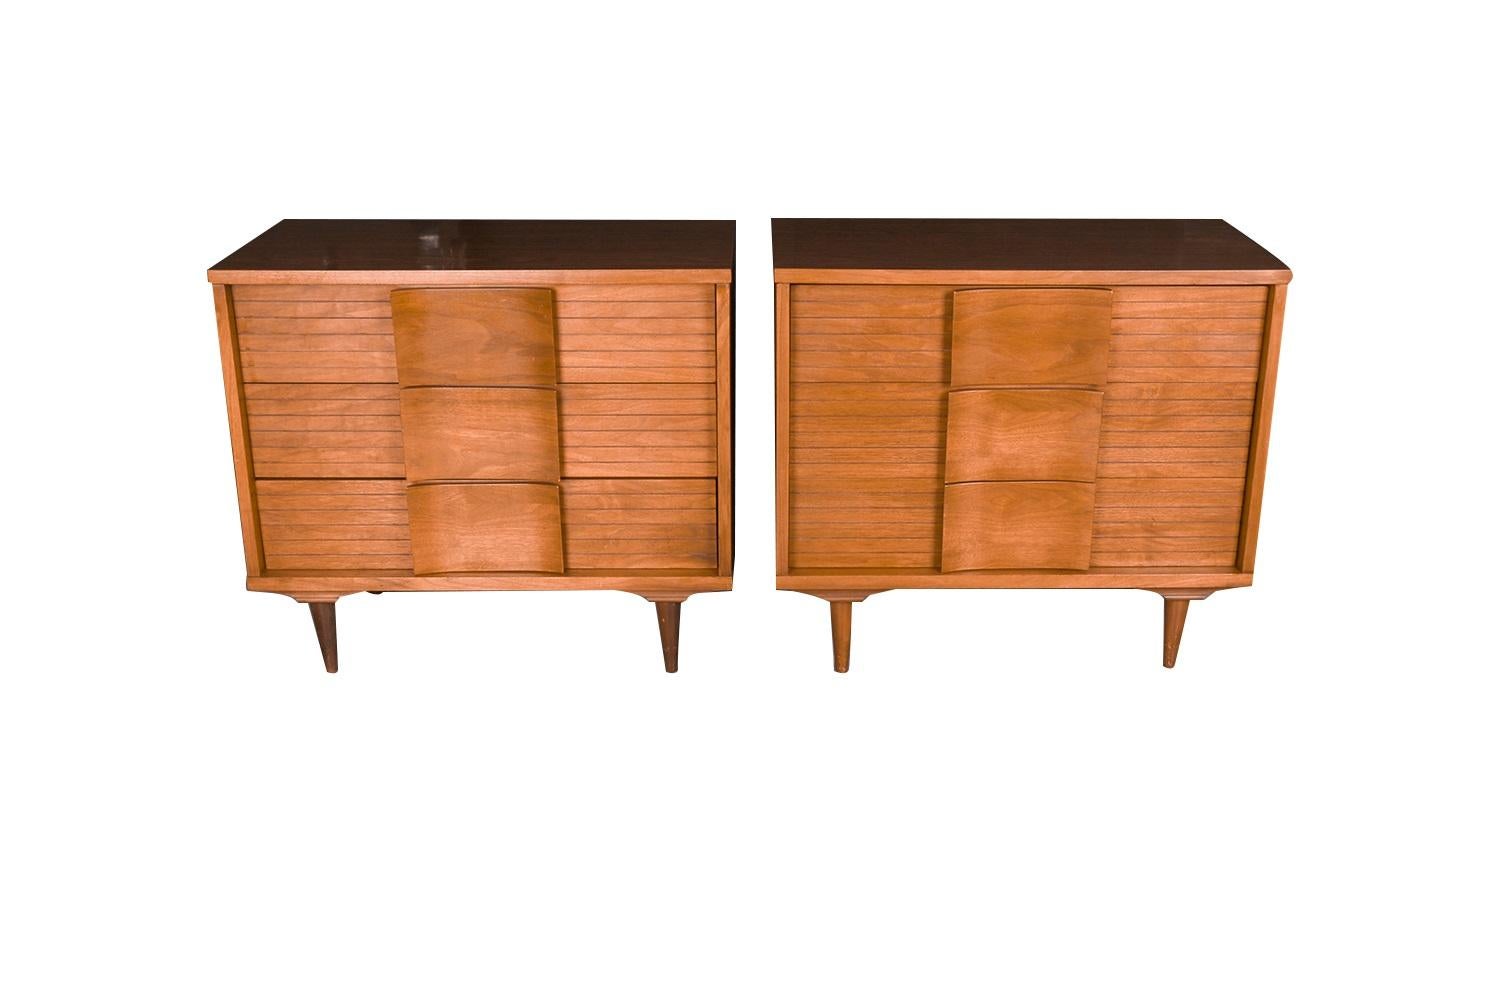 Beautiful architecturally stunning MID CENTURY DANISH MODERN  1960’s pair of Bachelor chest by Johnson Carper. Mad Men Home Decor, Vintage Furniture, Fashion Trend Johnson Carper, 1960 Movie Prop. These very cool Bachelor chests have sculptured